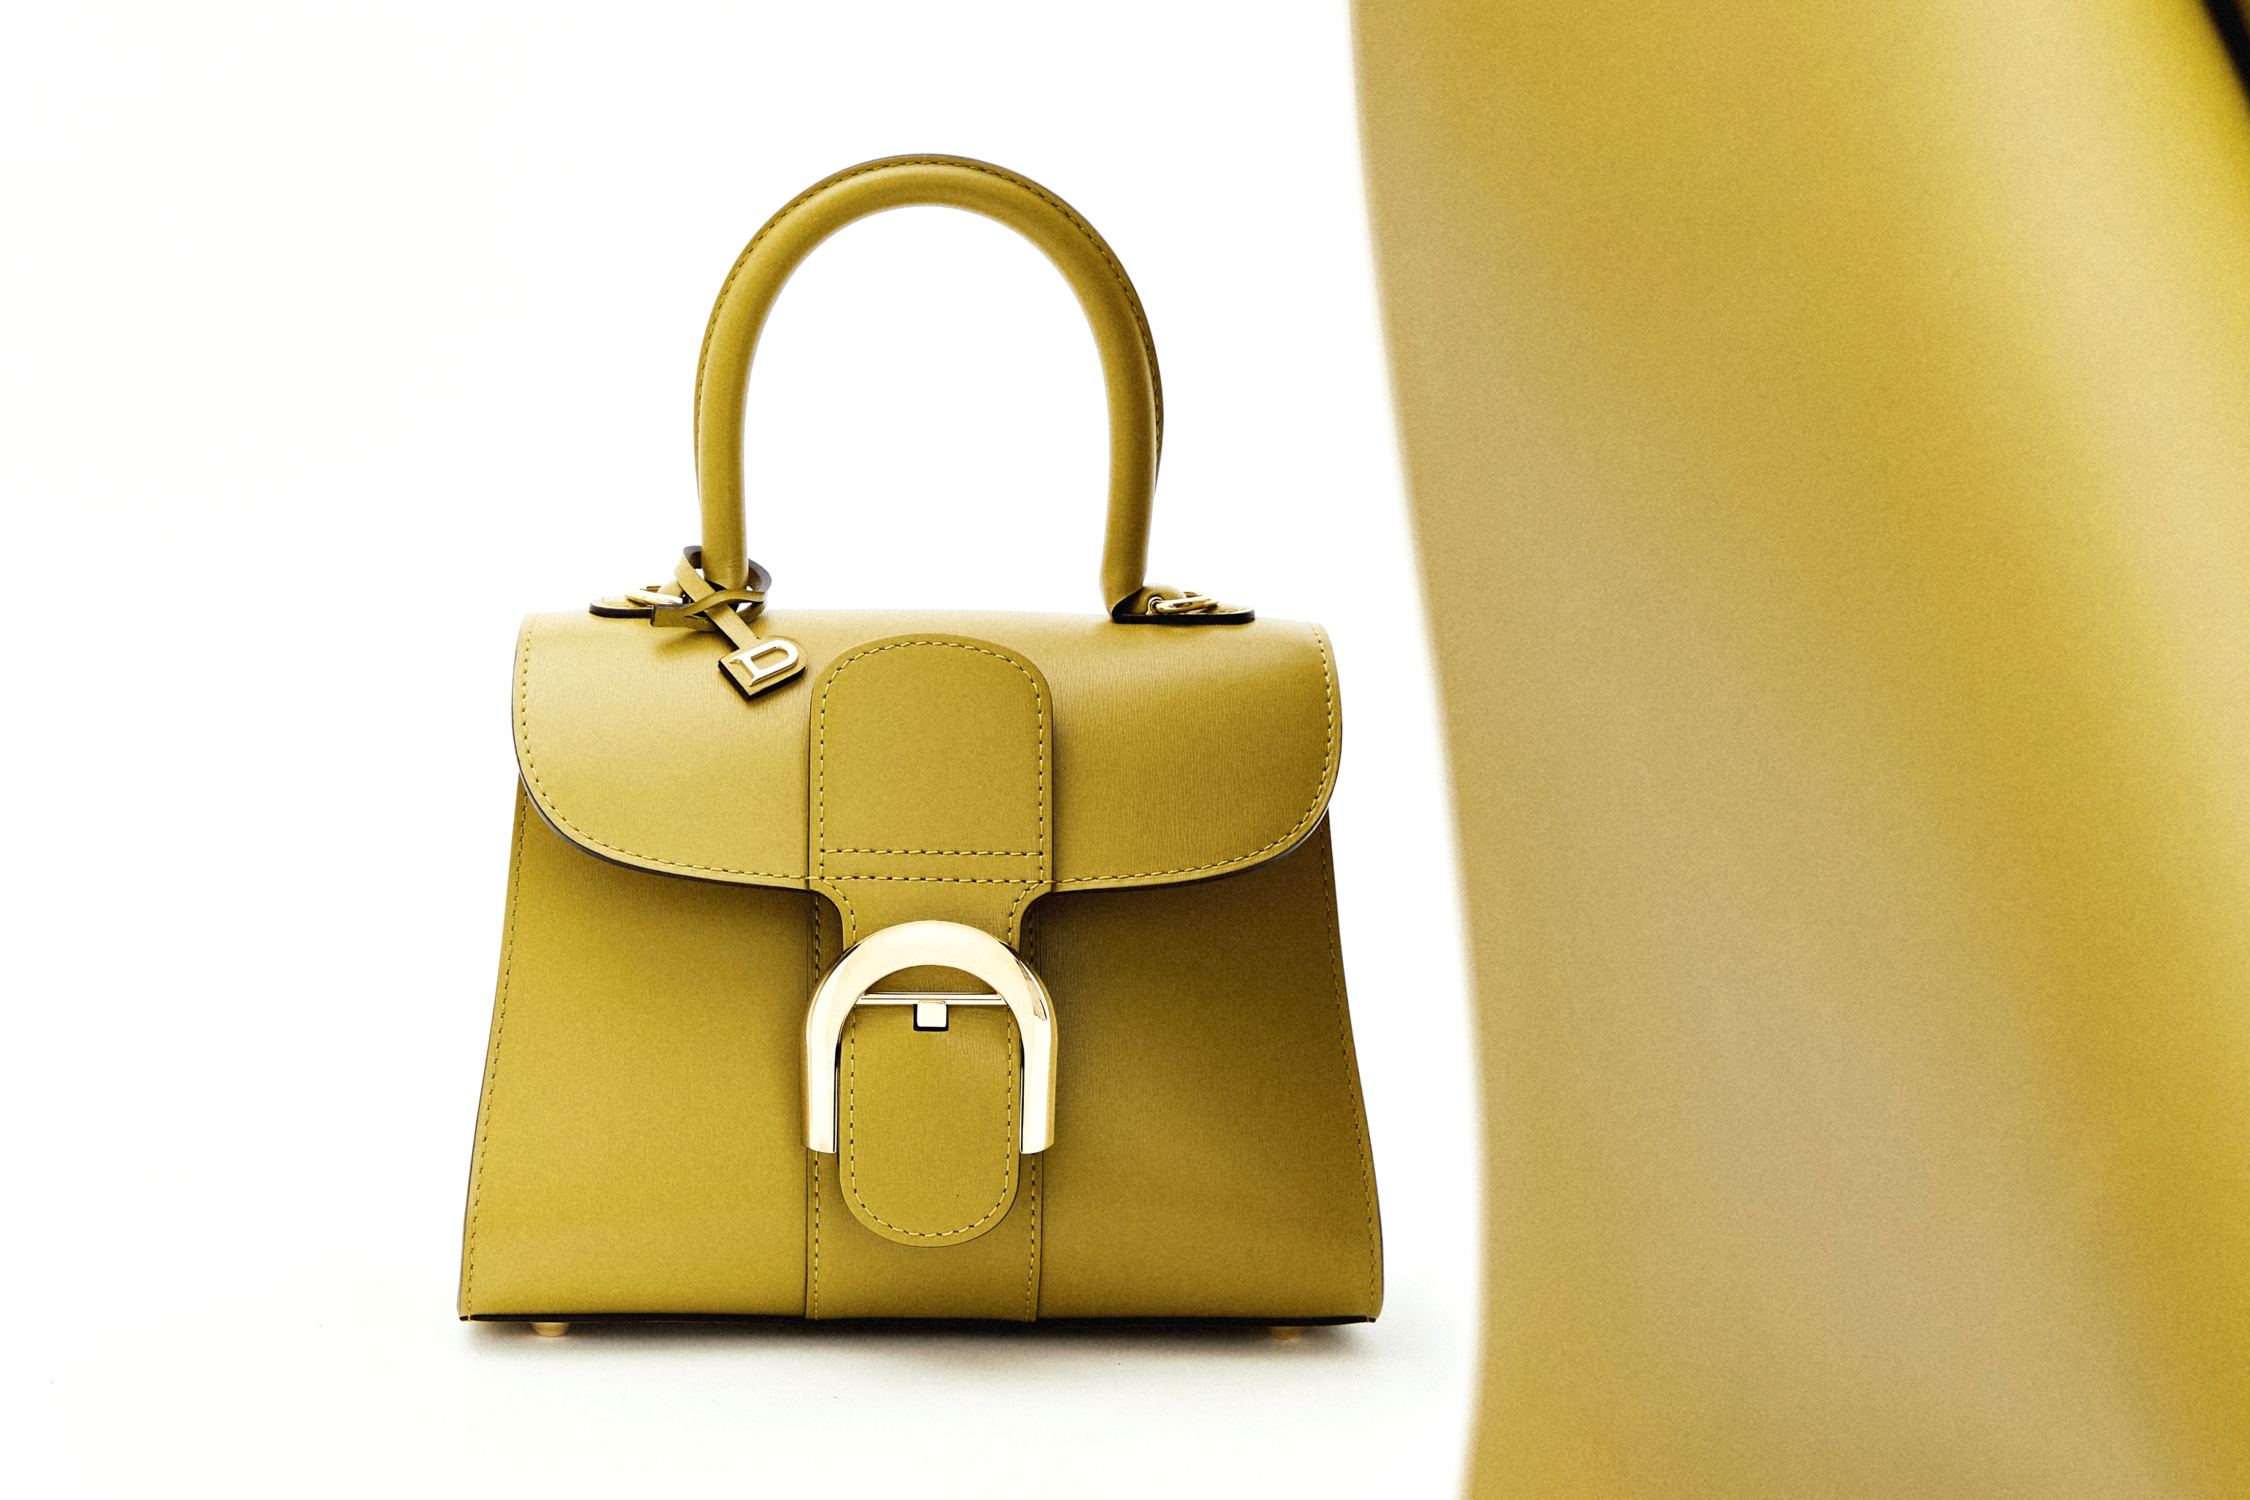 Luxury leather brand Delvaux set to bag Bond Street site for first